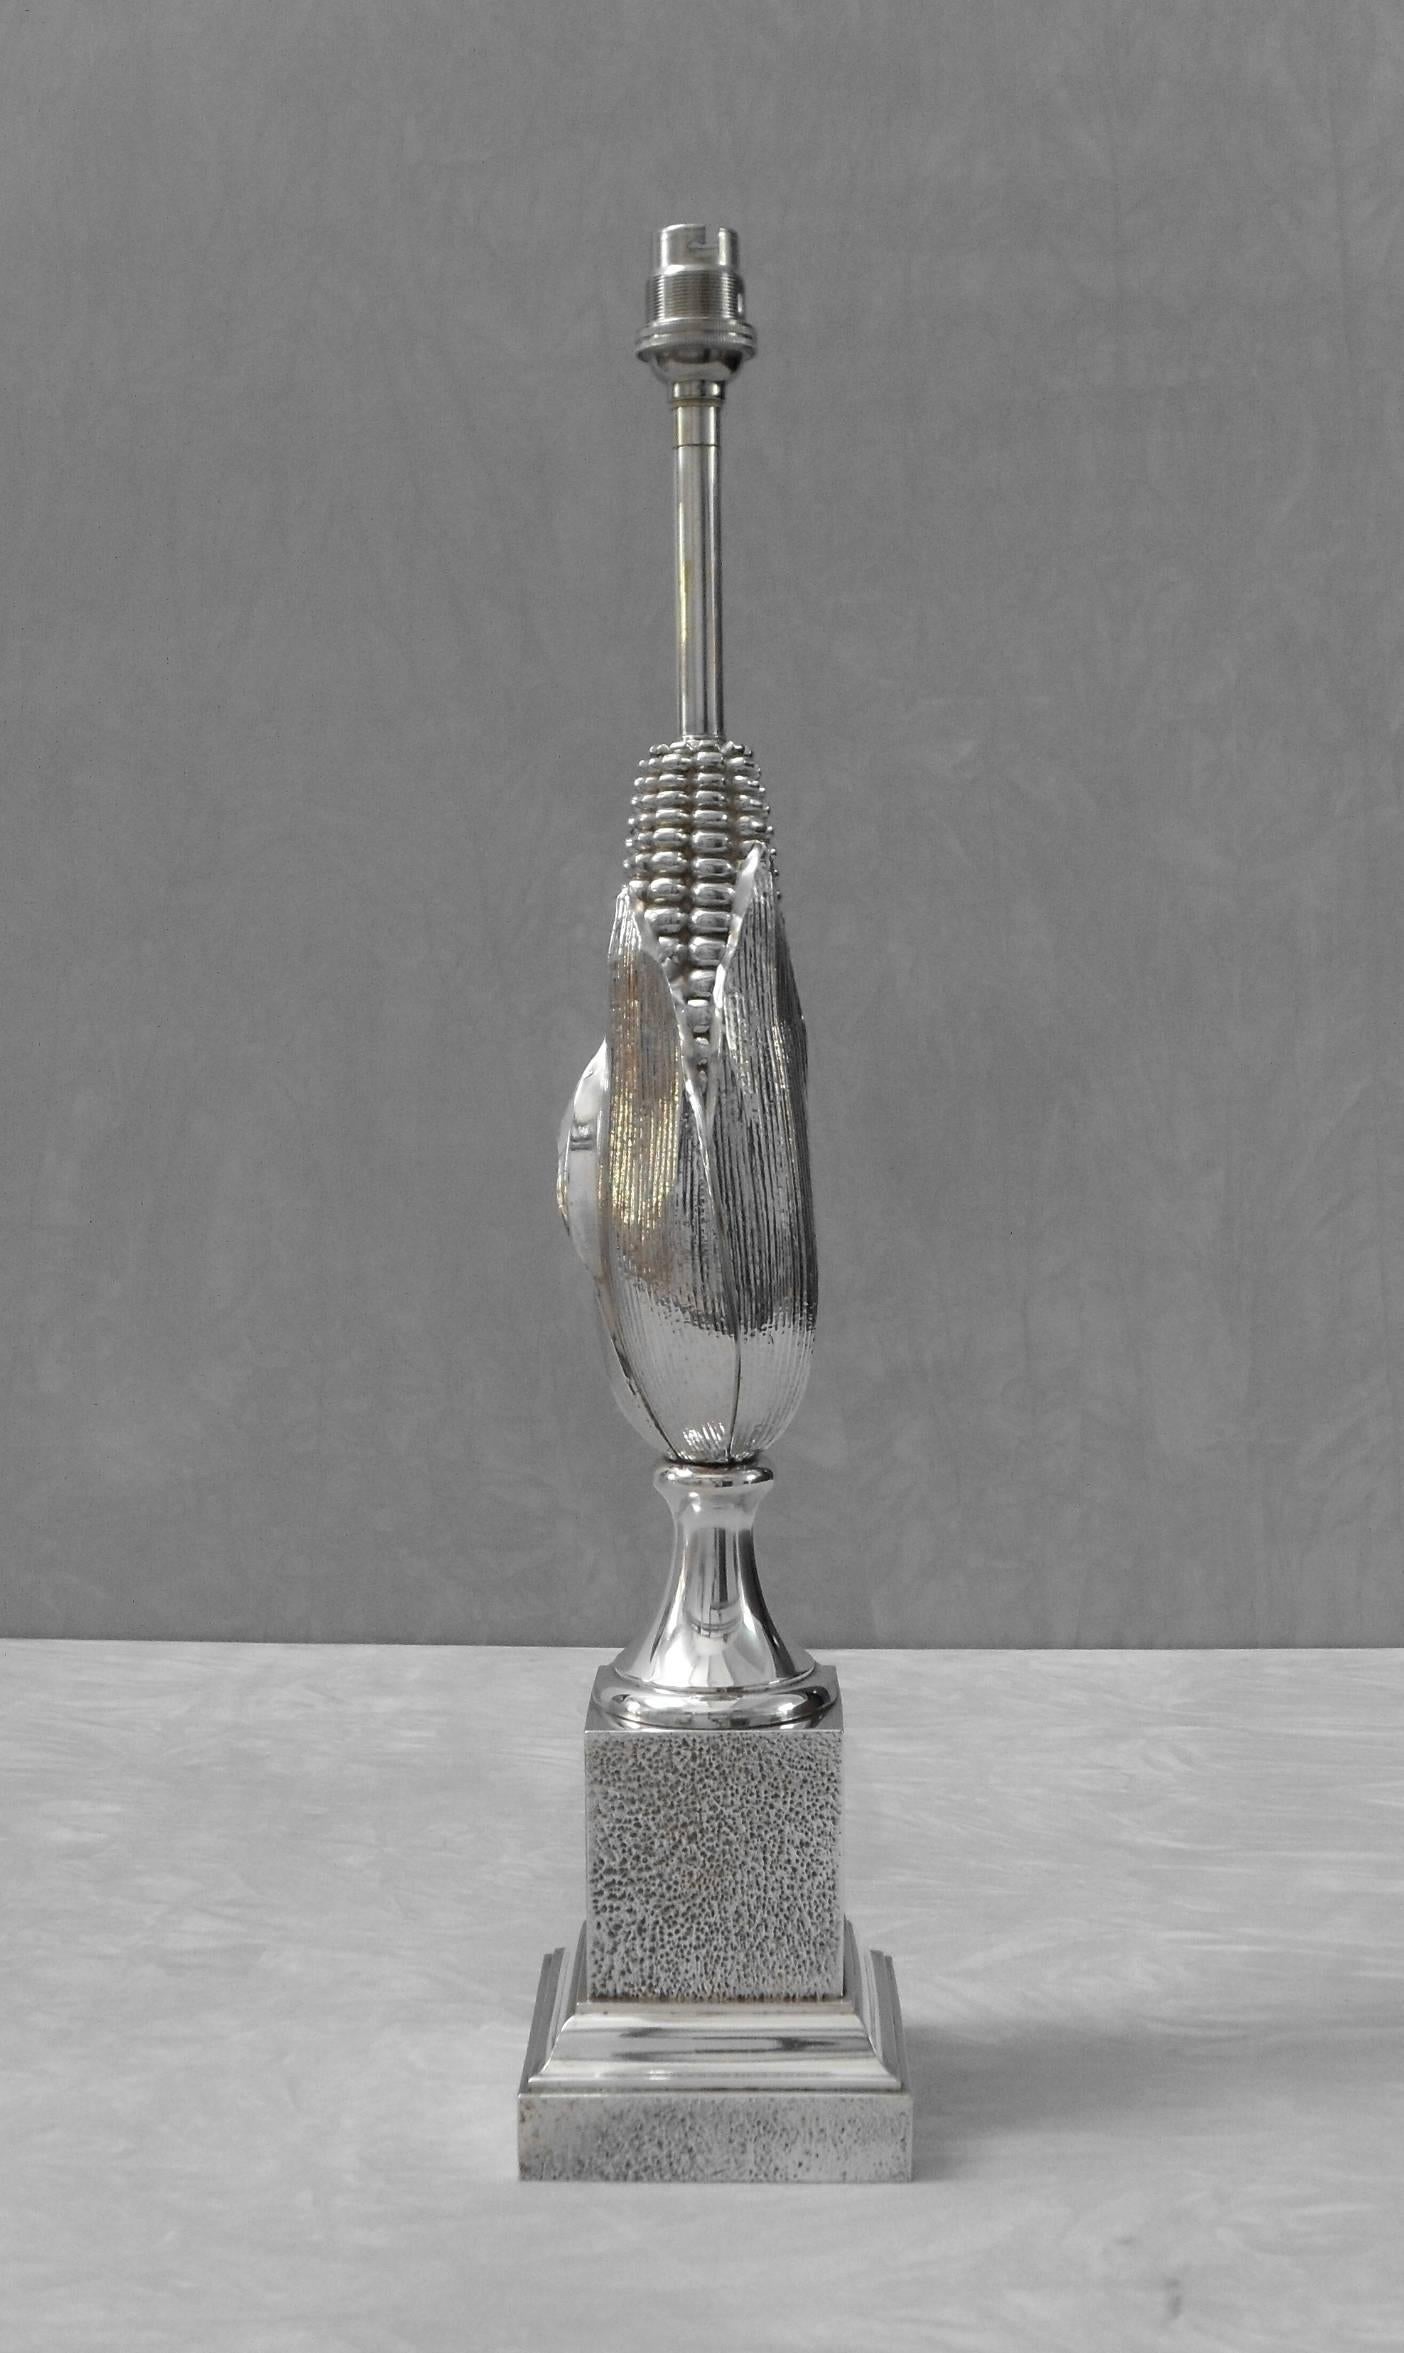 A very smart French Mid-Century Modern chrome 'Epi de Mais' table lamp by Maison Charles on square textured pedestal base formed into one of their signature corncob designs. 

The lamp comes with a new 35cm grey/silver silk lampshade and the lamp